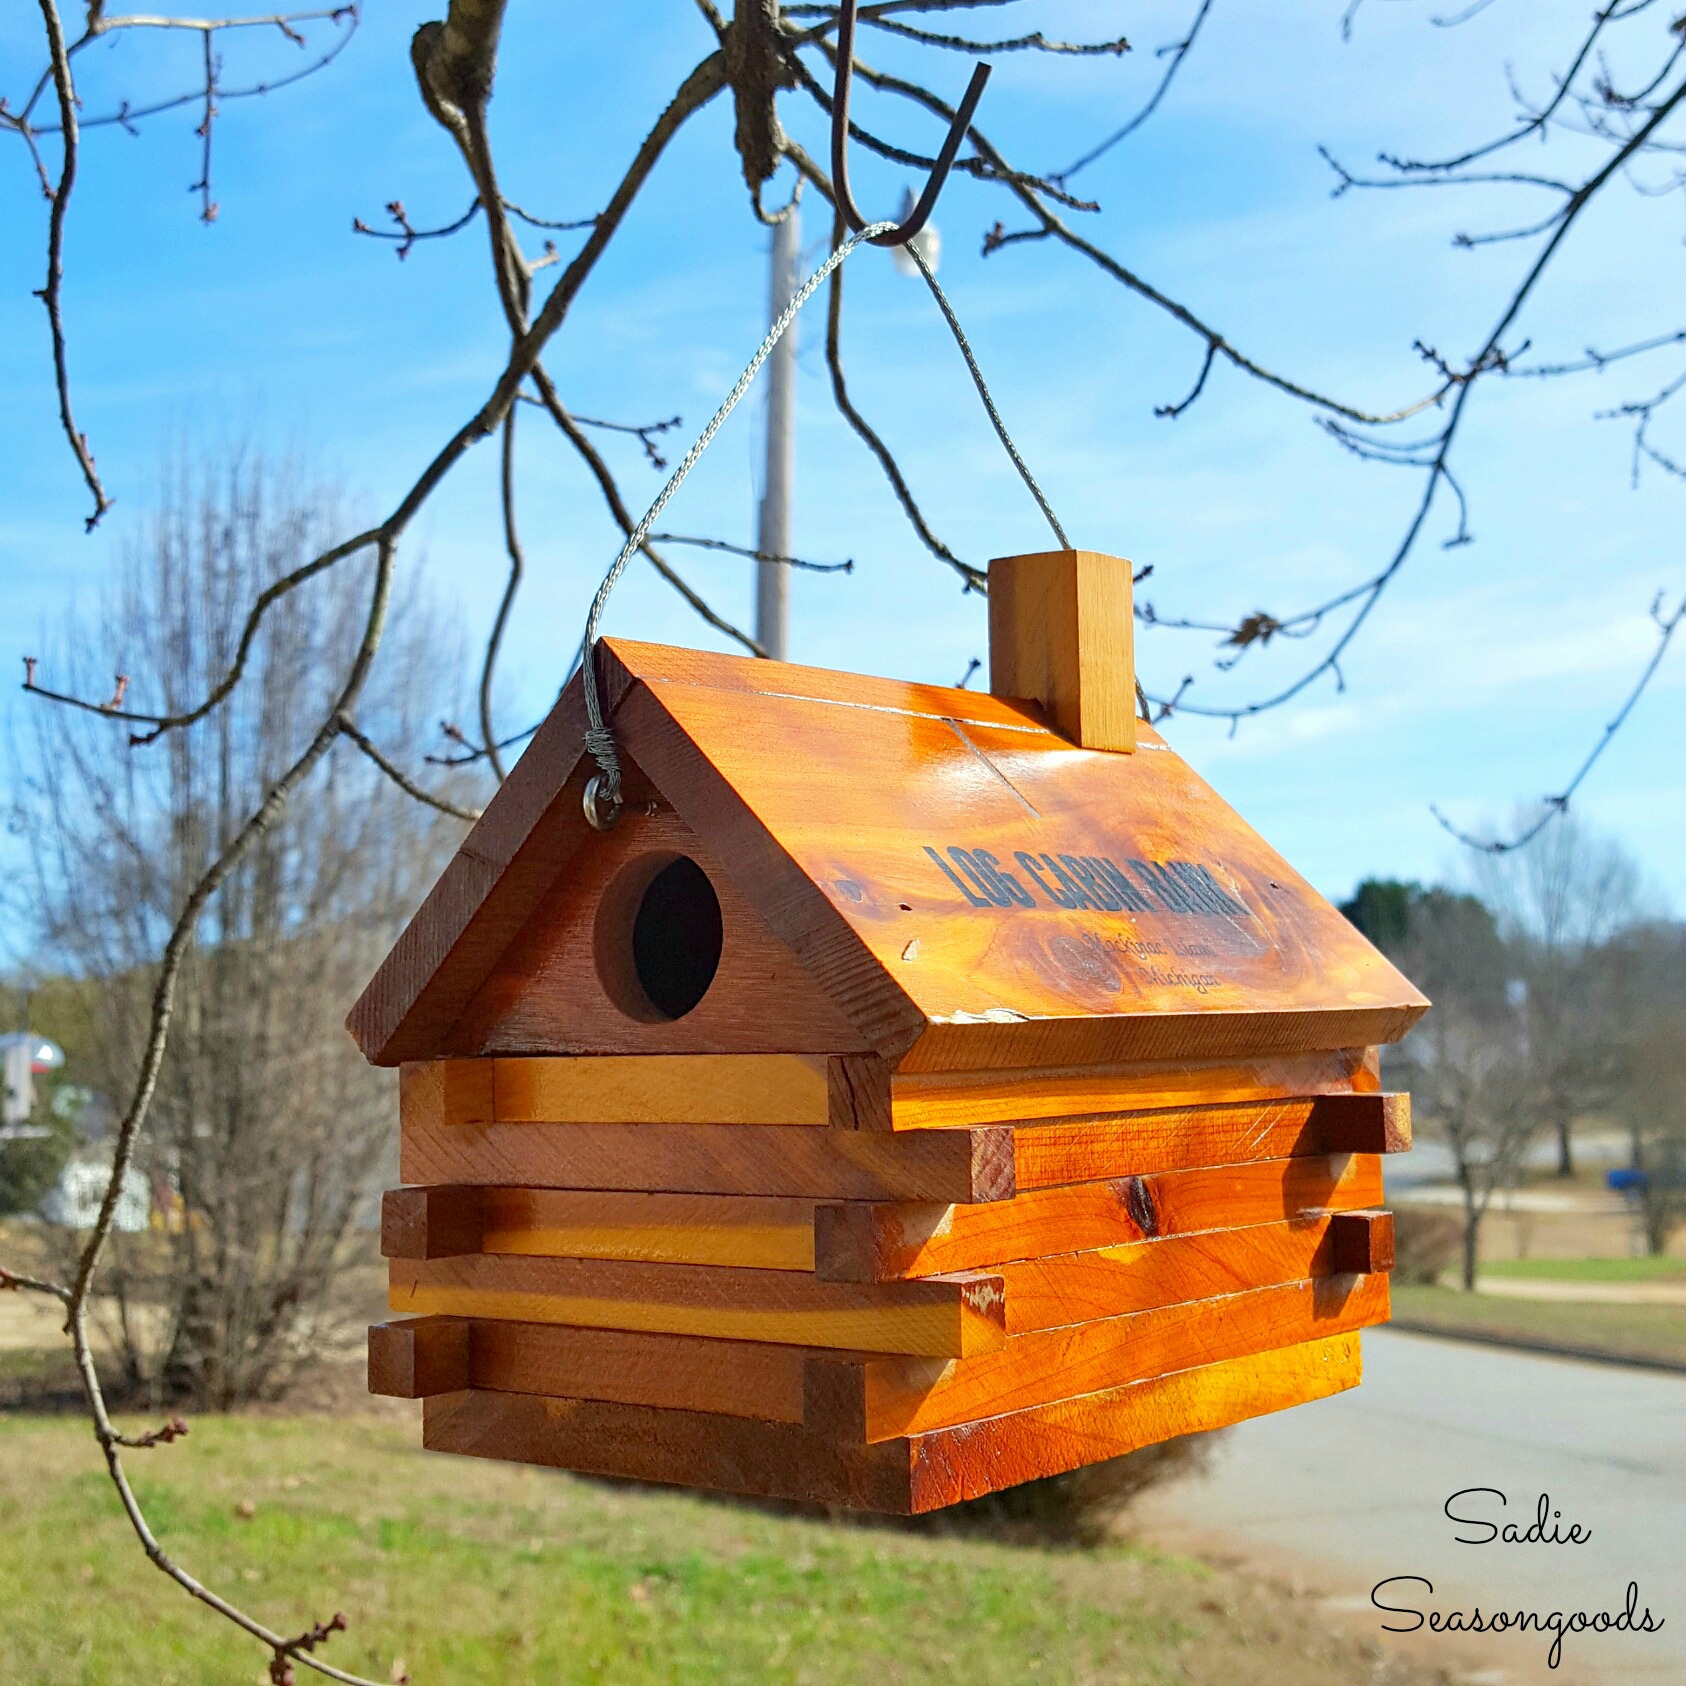 http://thecottagemarket.com/wp-content/uploads/2017/03/Vintage_souvenier_log_cabin_bank_repurposed_upcycled_as_DIY_birdhouse_for_small_birds_wrens_and_chickadees_by_Sadie_Seasongoods.jpeg